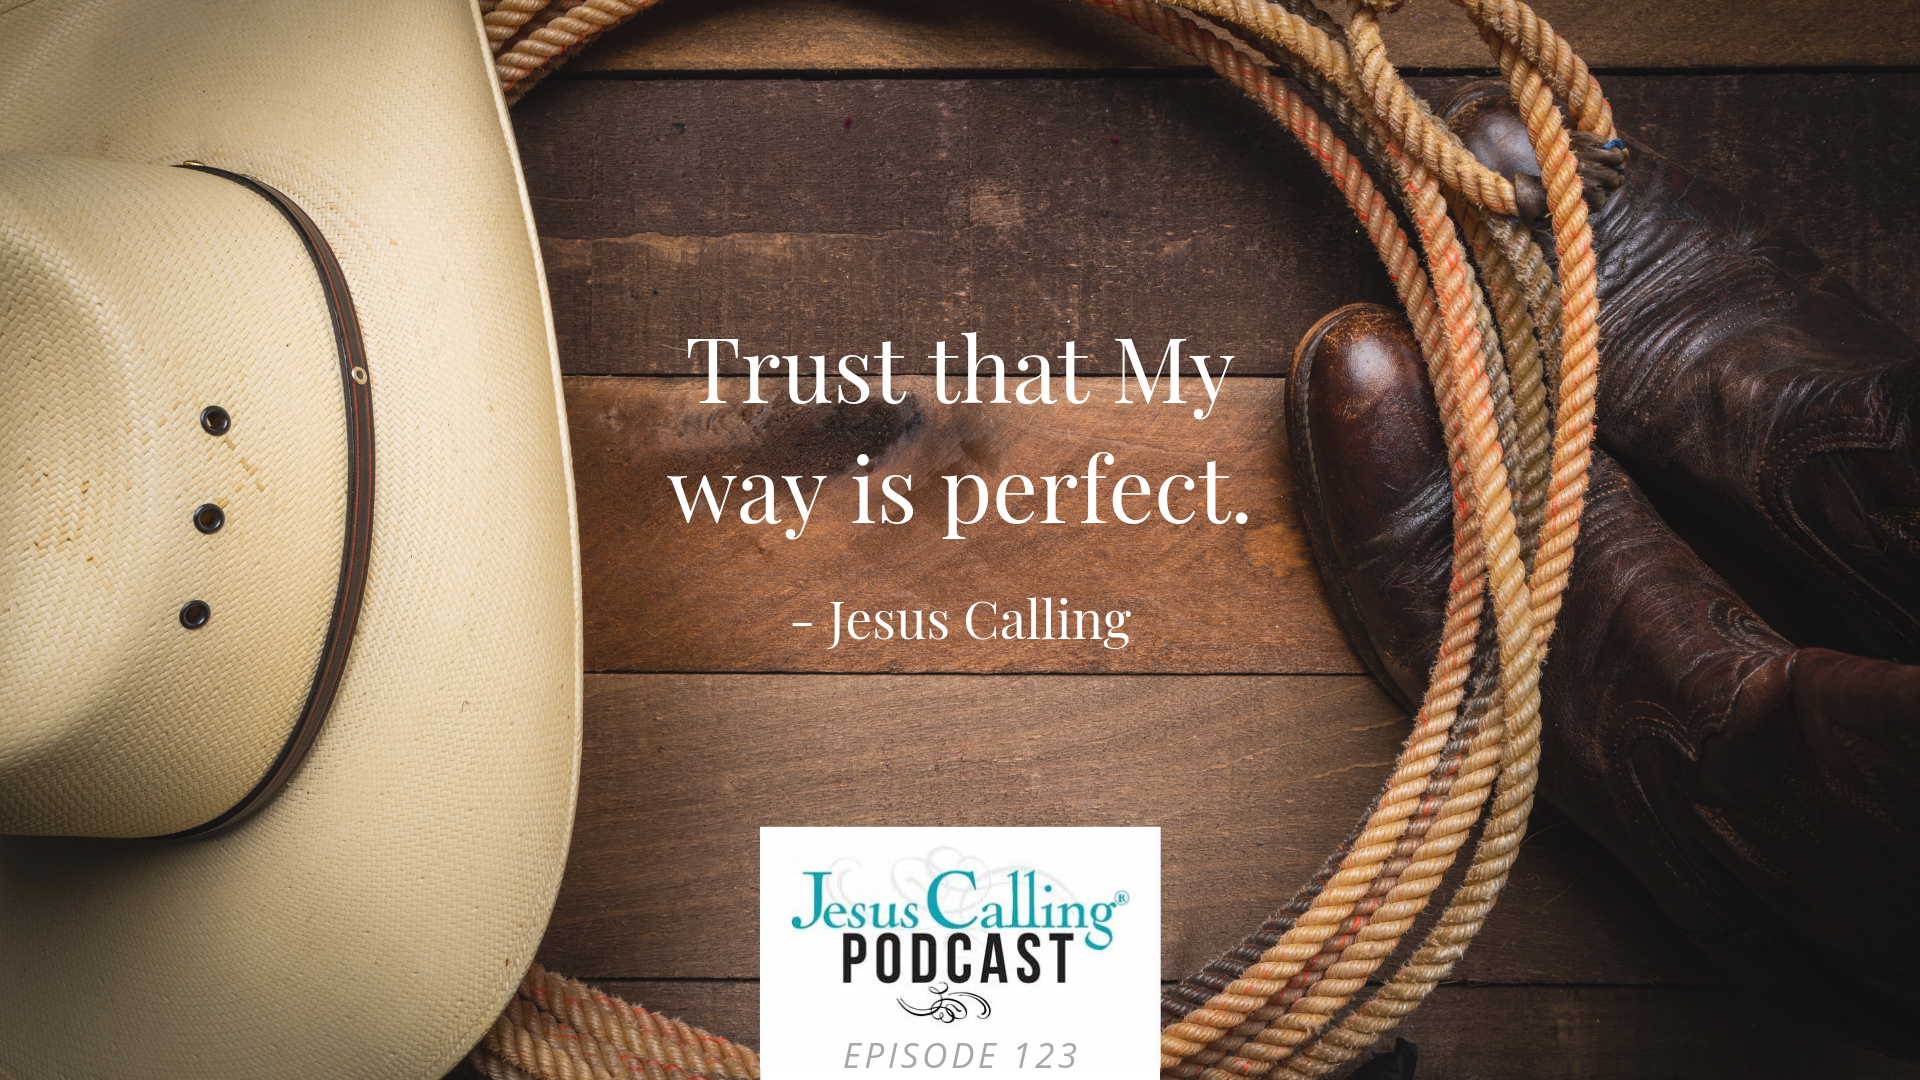 Jesus Calling podcast featuring Aaron Watson & Anthony Lucia